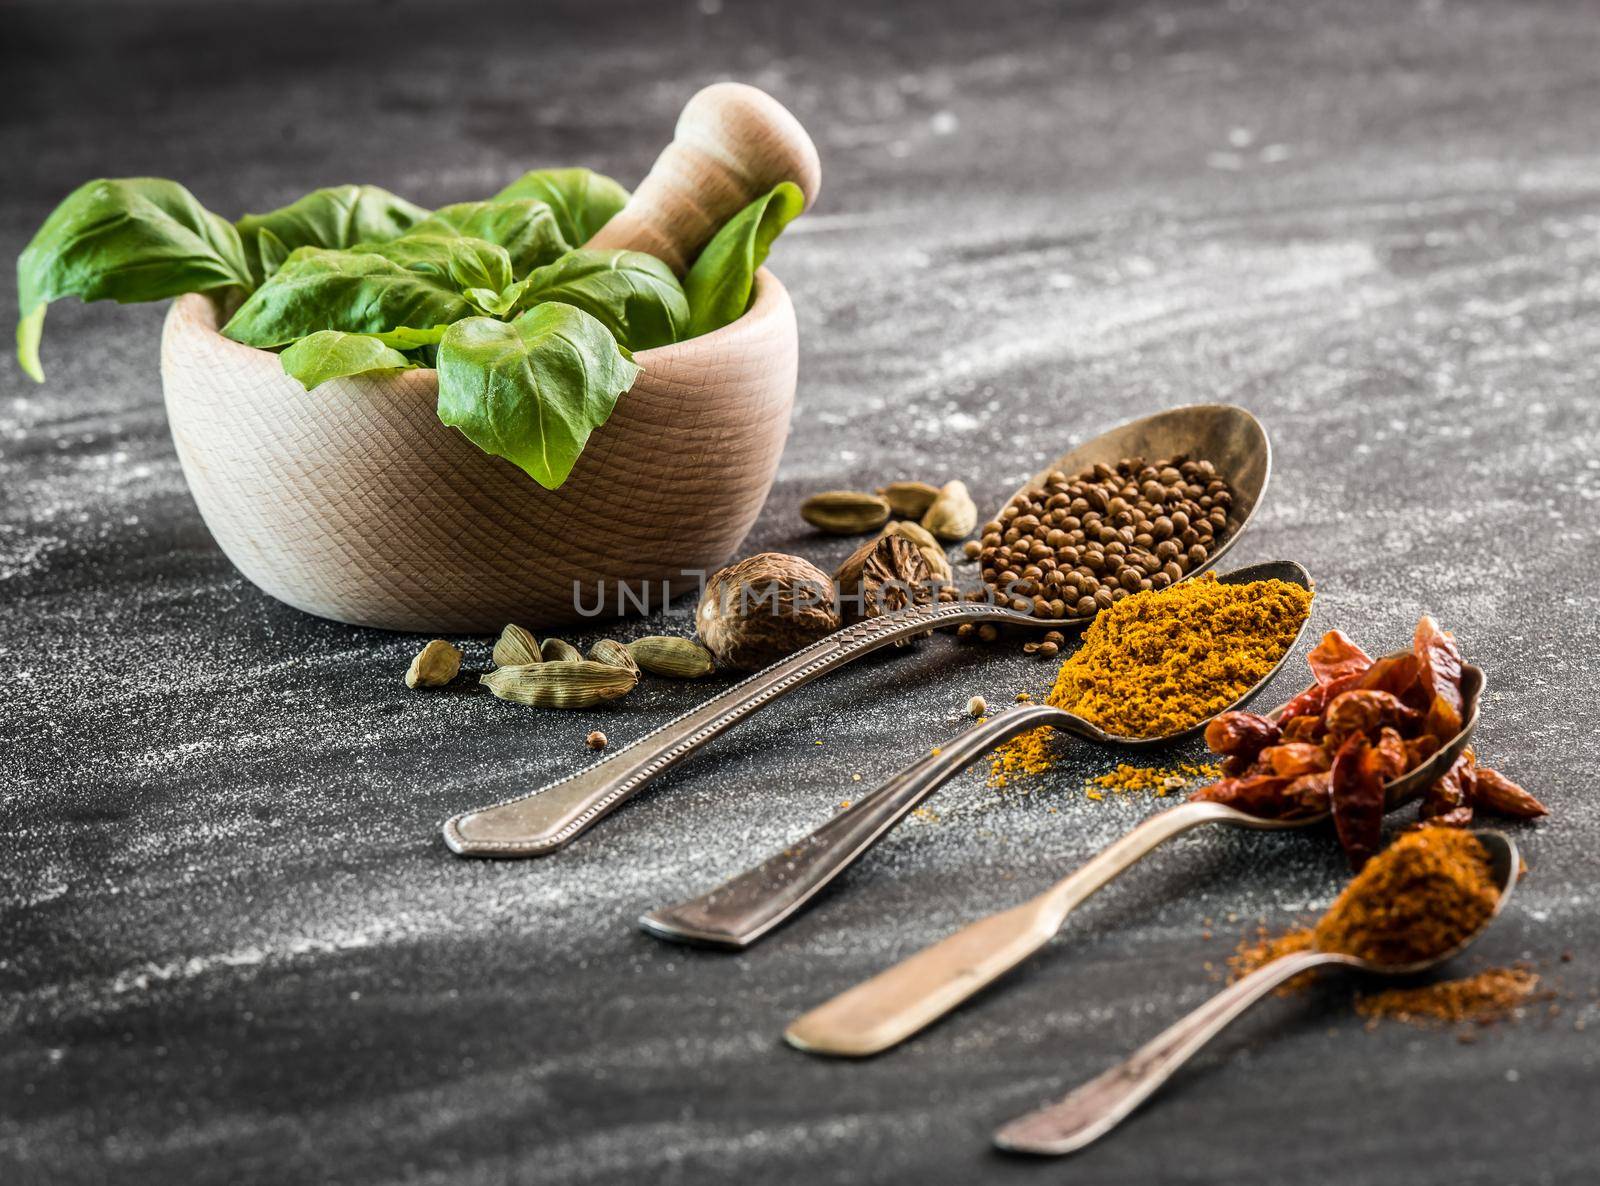 basil and spices by GekaSkr